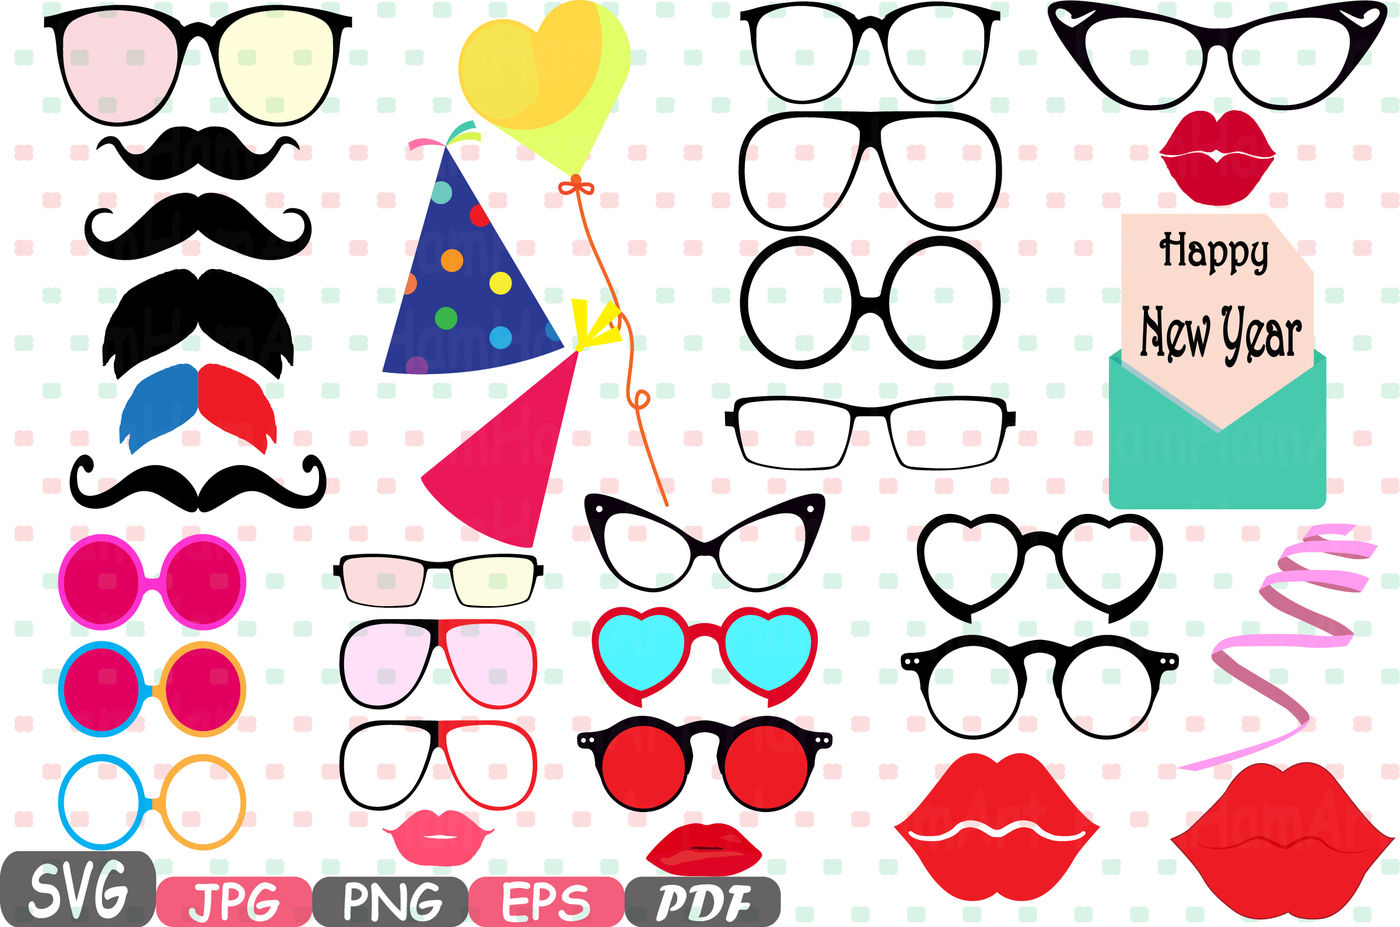 Party Photo Booth Prop Emoji Prop Silhouette Happy New Year Cameo Svg Stickers Clipart Face Clip Art Digital Graphics Commercial Use 4p By Hamhamart Thehungryjpeg Com